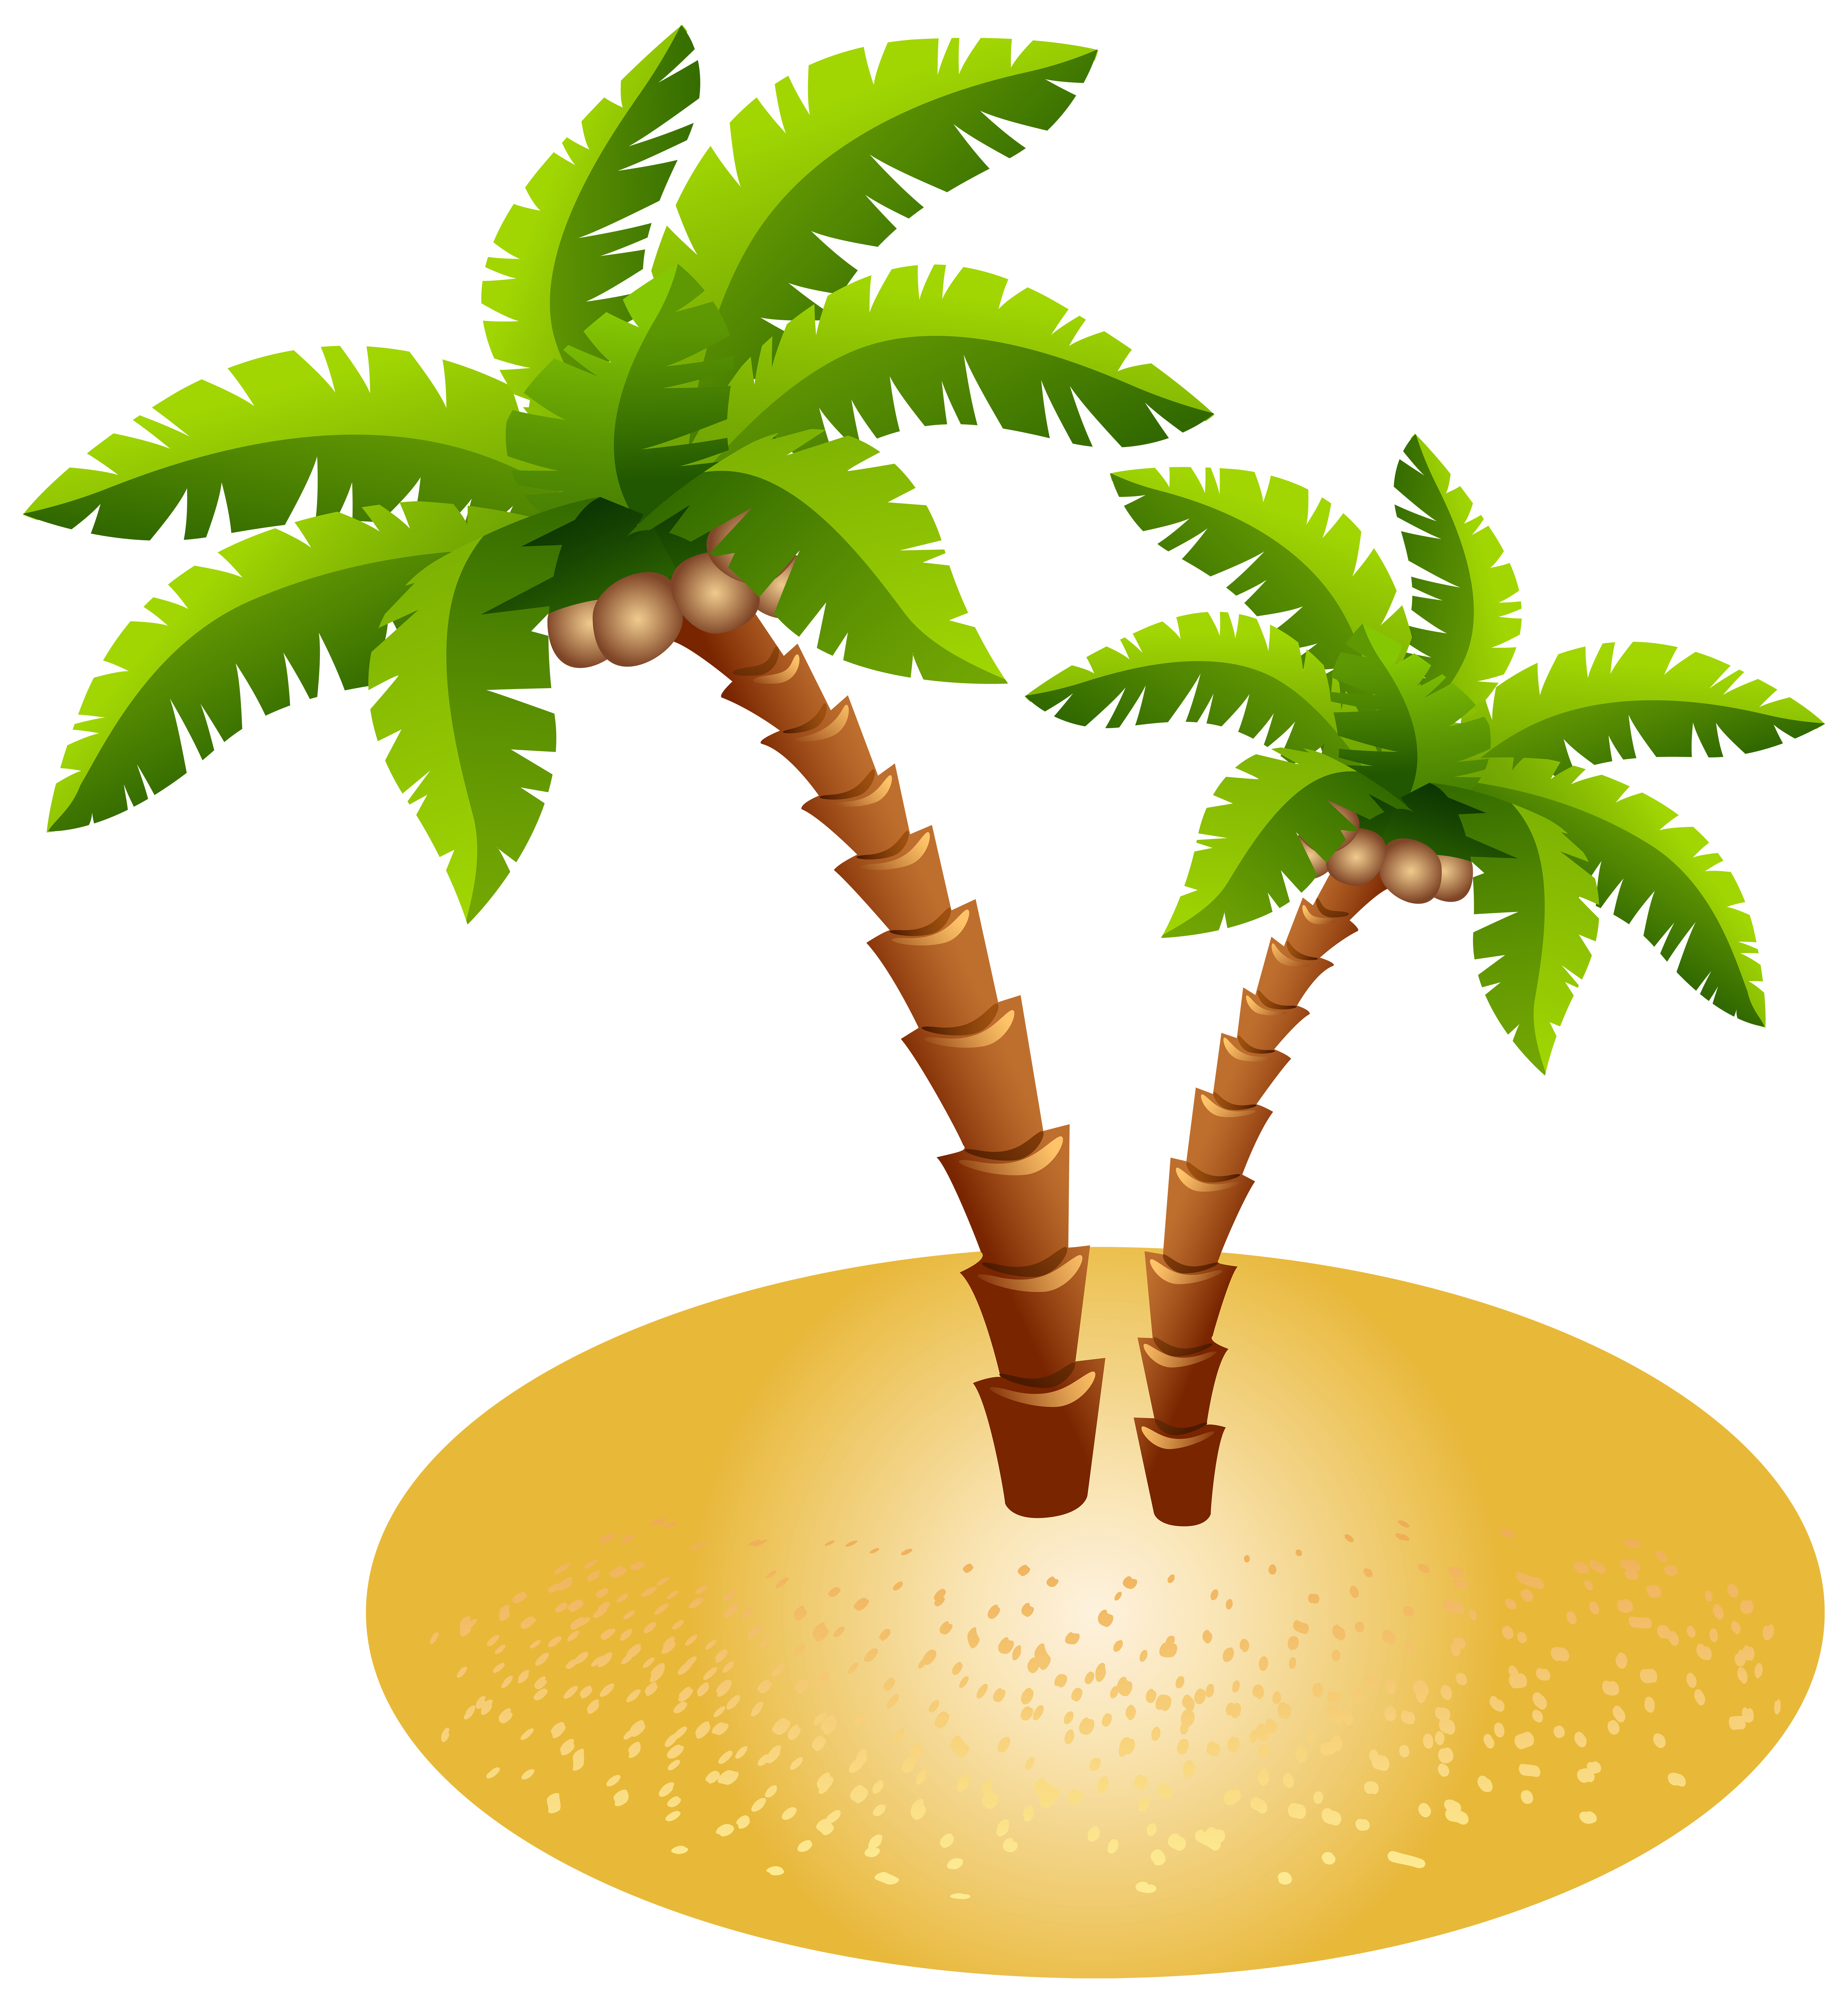 And Island Sand Transparent Palms Free Transparent Image HD Clipart